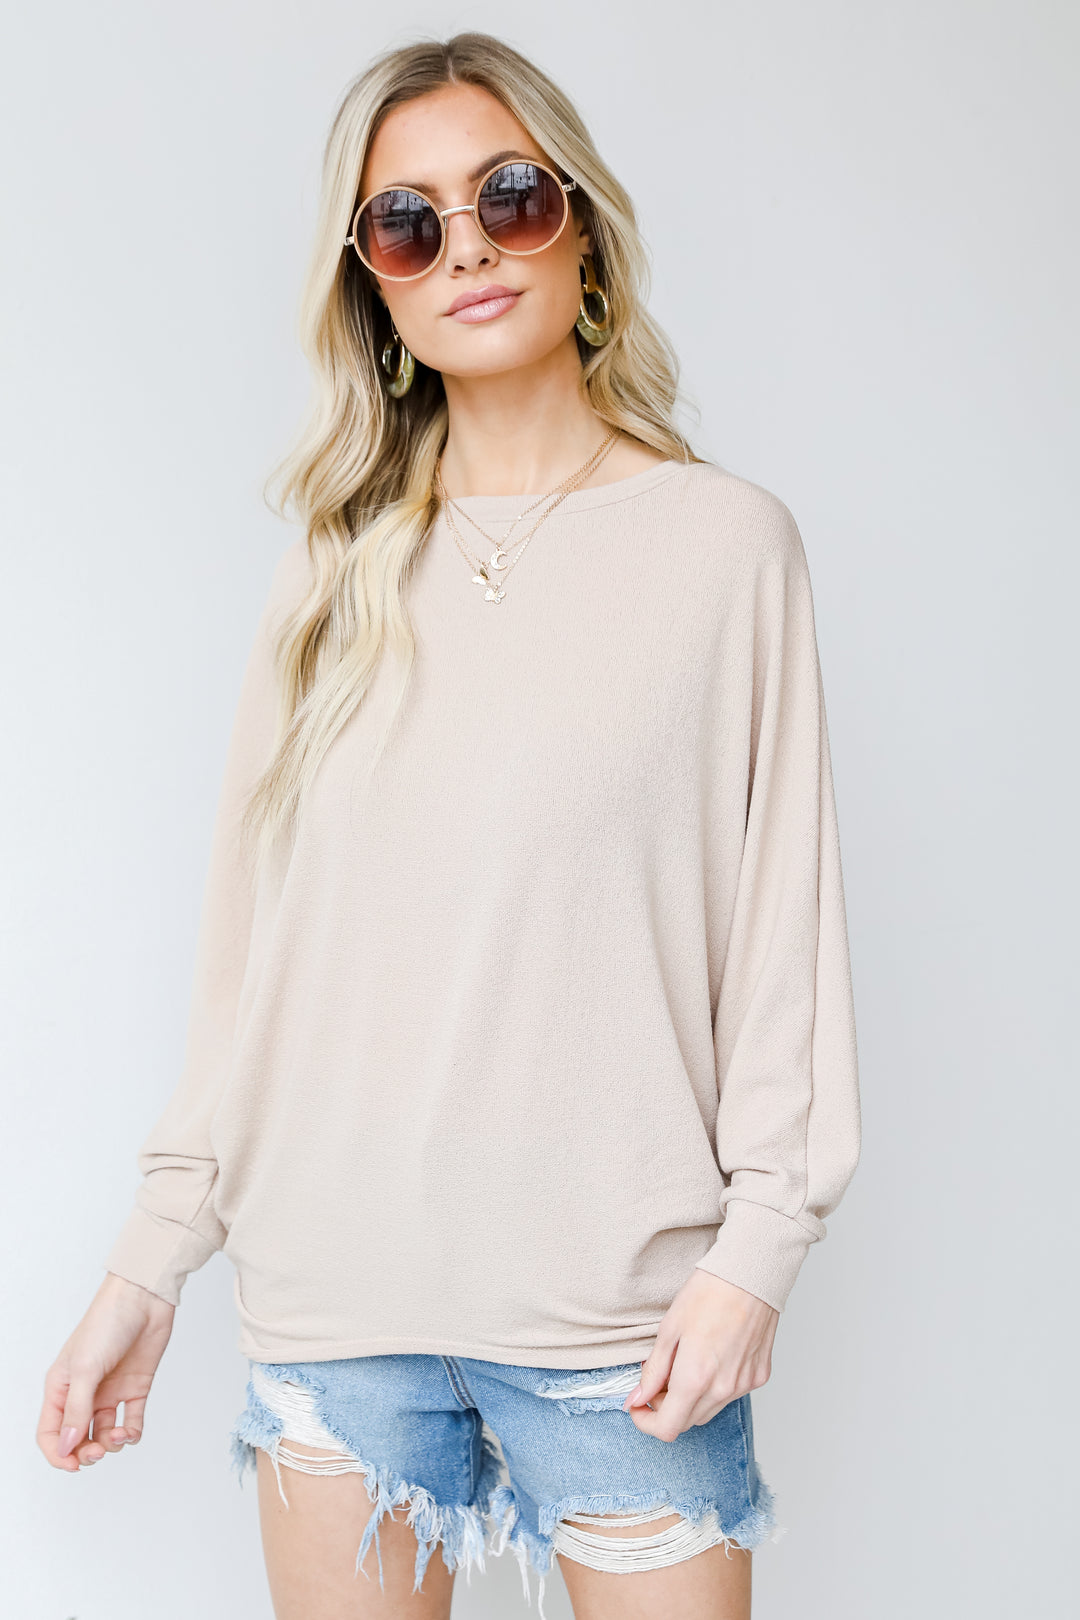 Knit Top in taupe front view